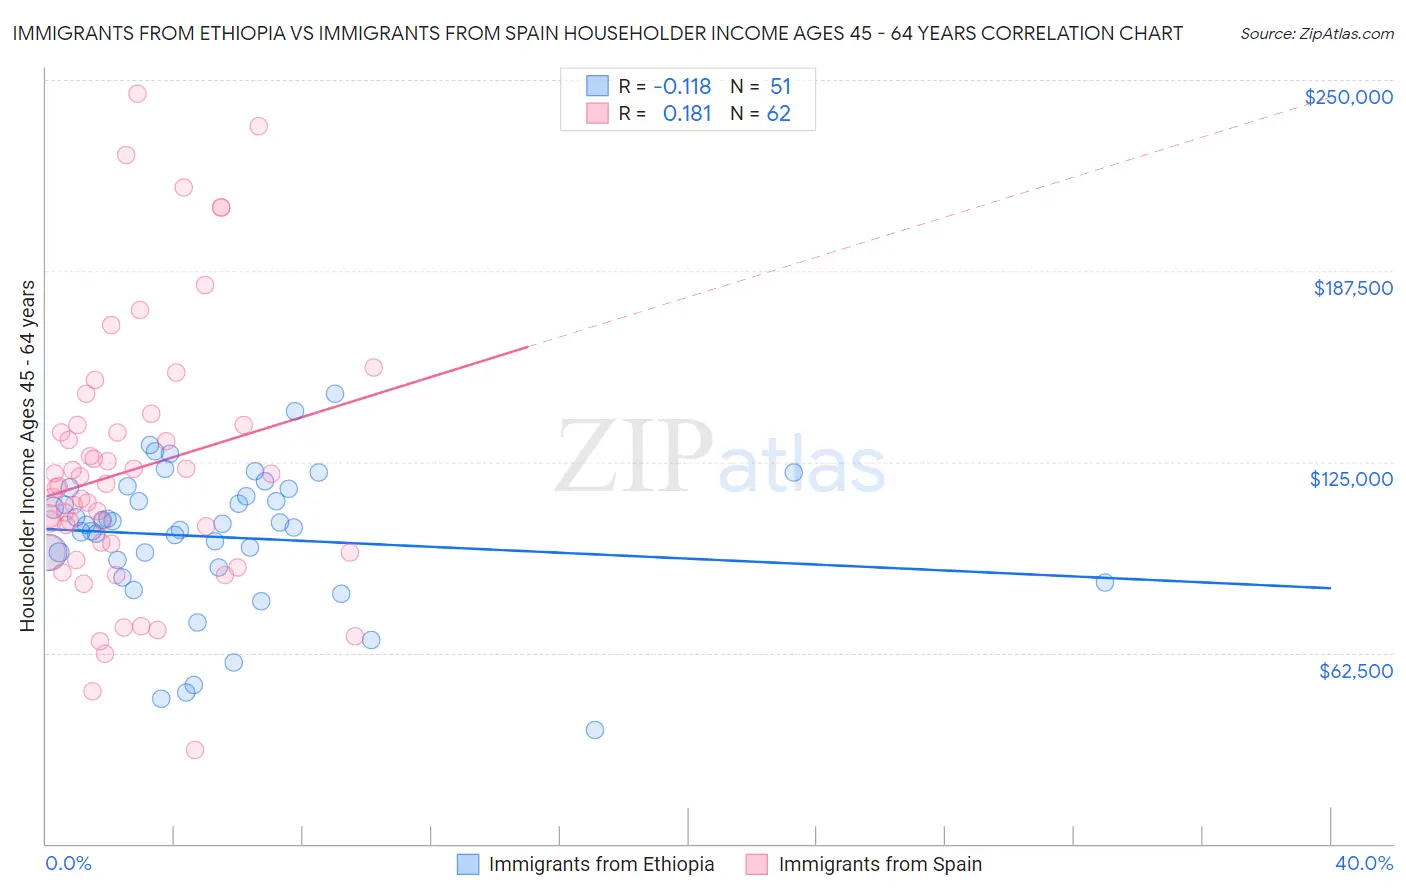 Immigrants from Ethiopia vs Immigrants from Spain Householder Income Ages 45 - 64 years